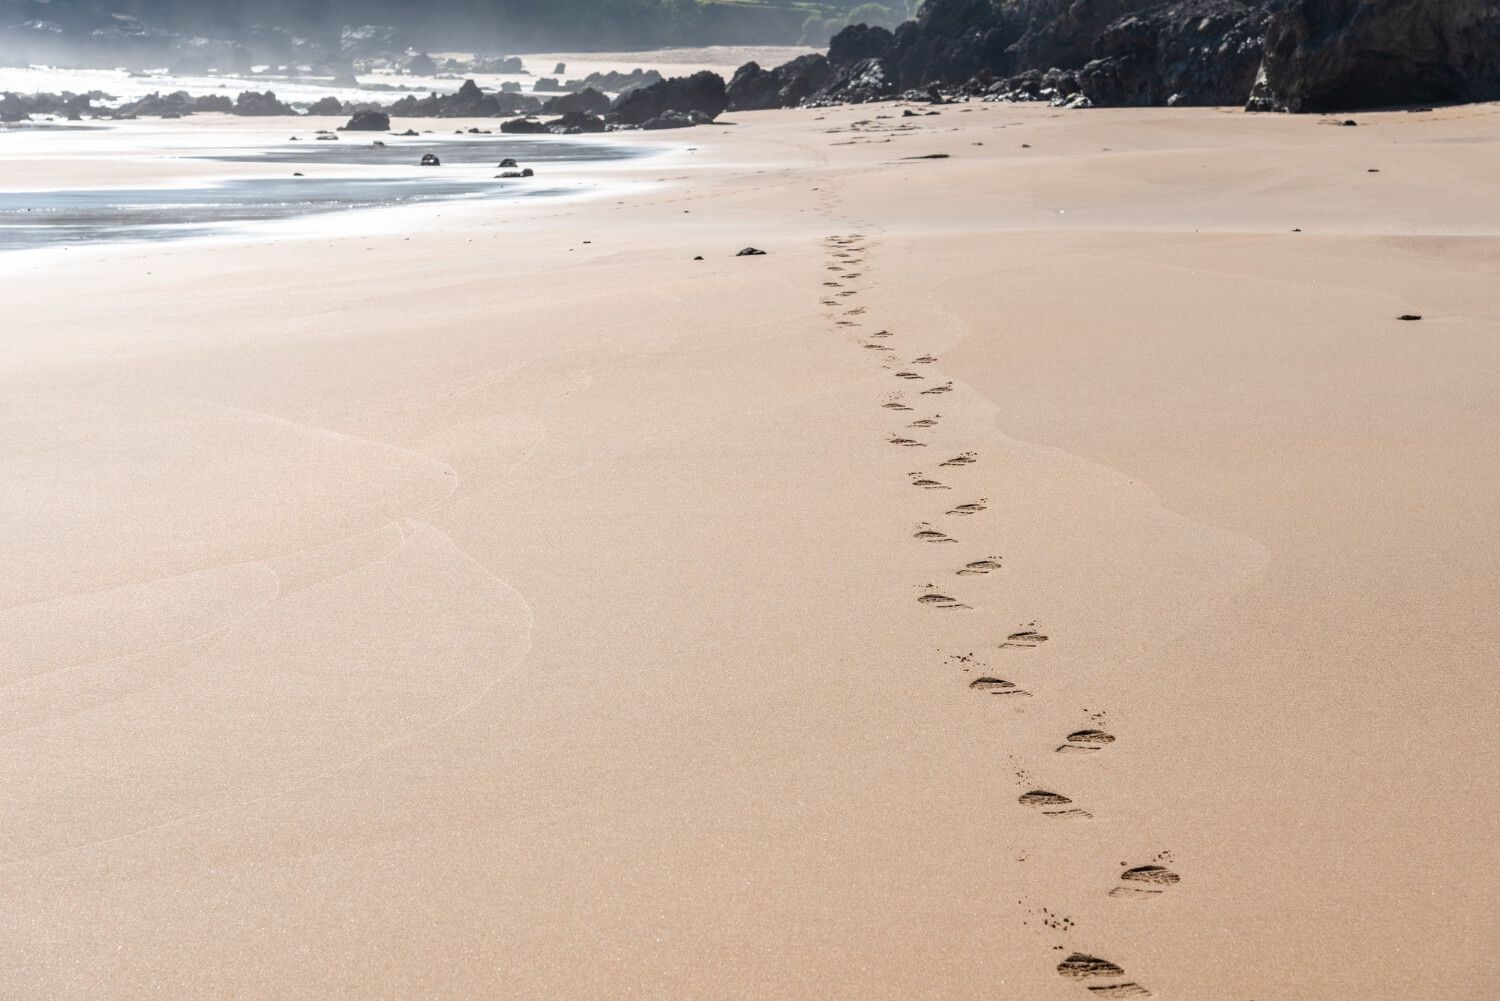 Footprints on sand with a pink ribbon nearby